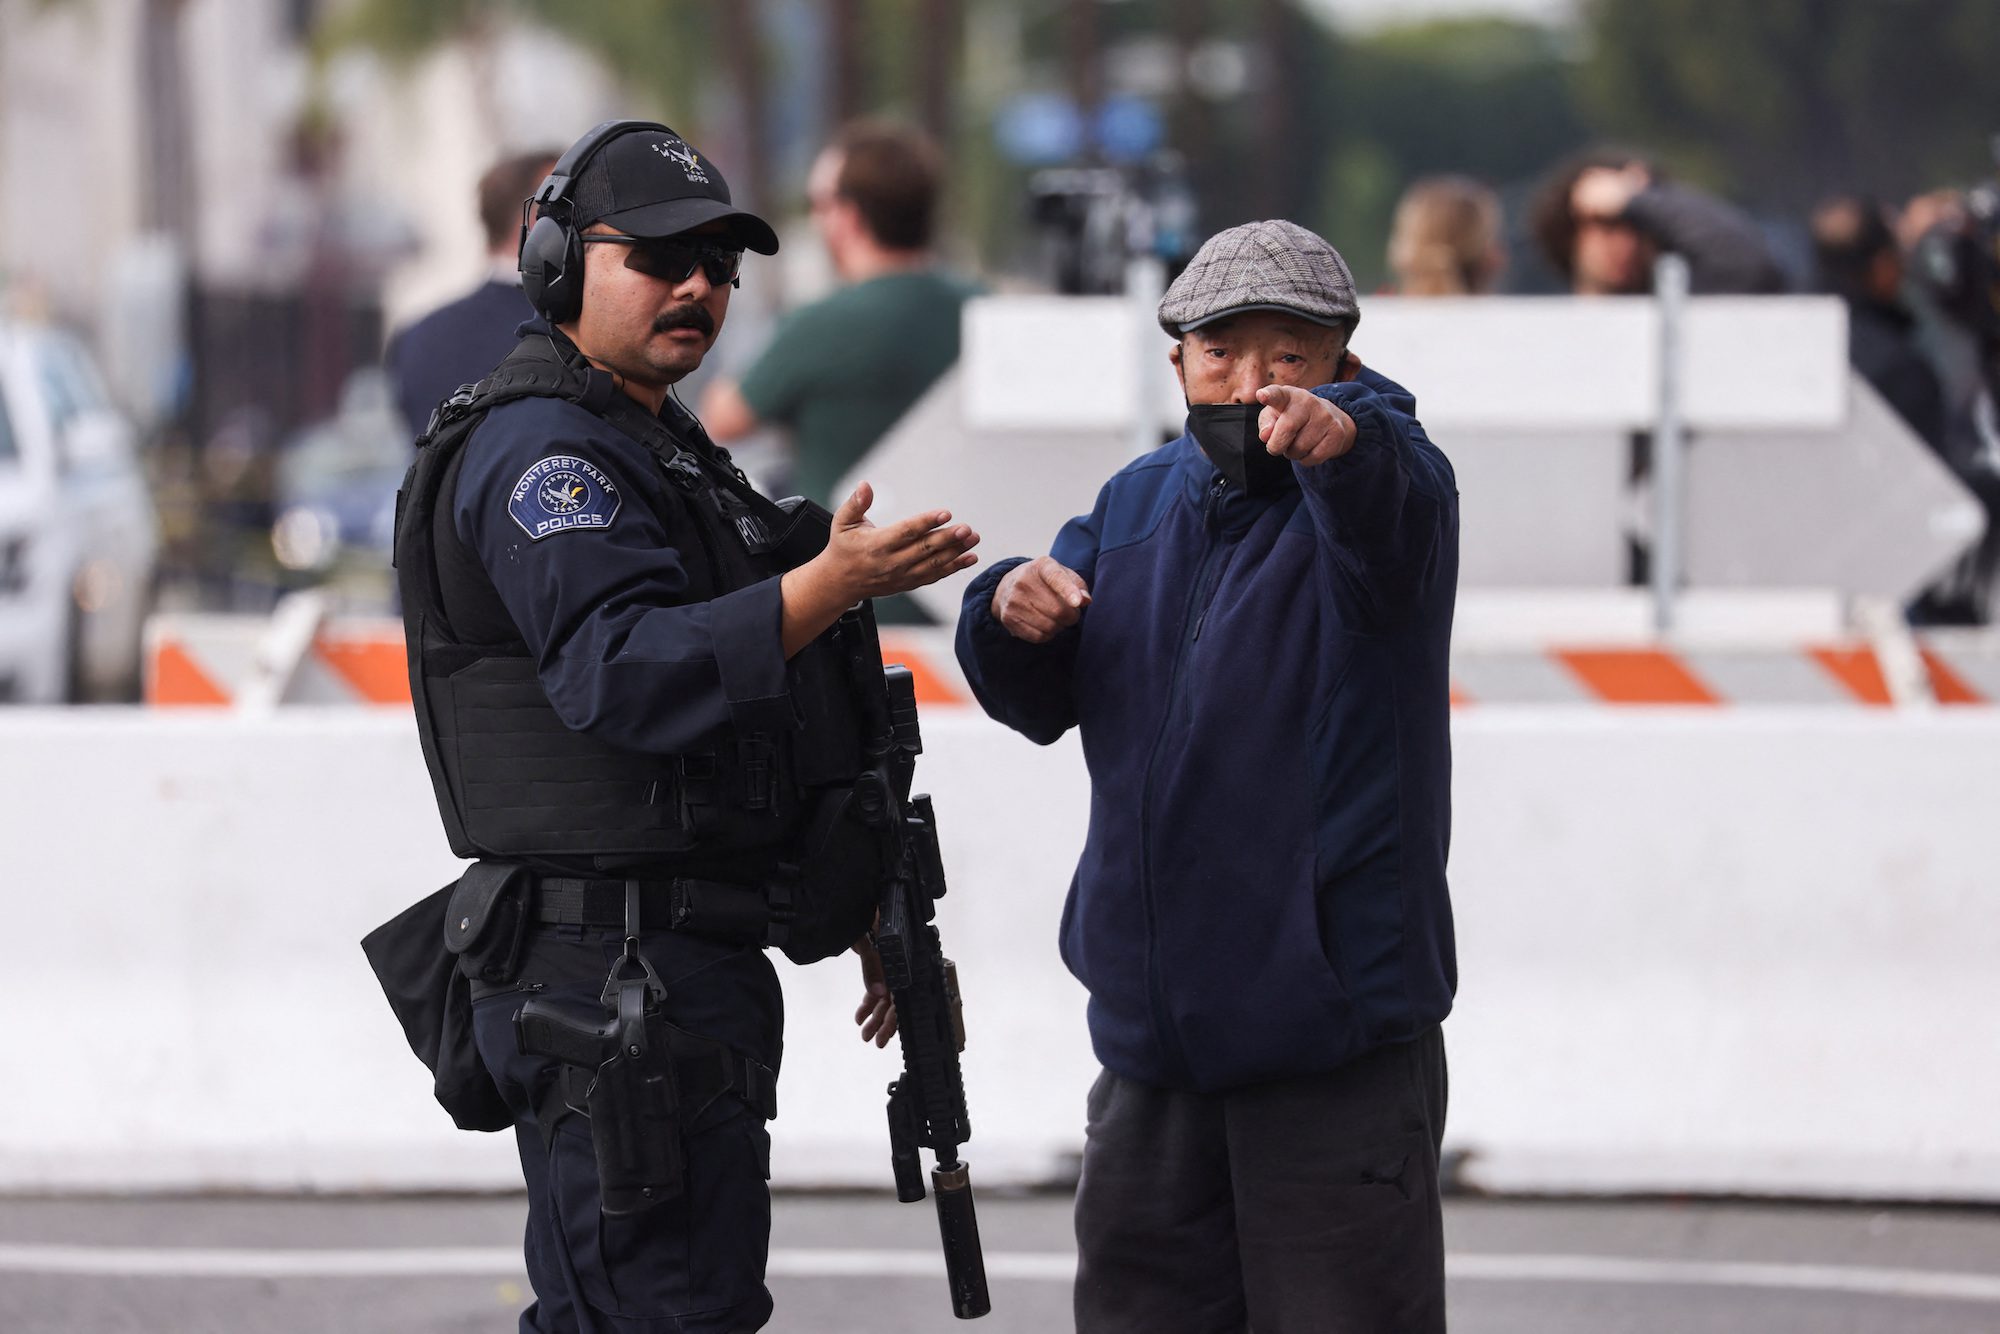 A man signals as a police officer directs him to walk away from the location of a shooting that took place during a Chinese Lunar New Year celebration, in Monterey Park, California, U.S. January 22, 2023. REUTERS/Mike Blake